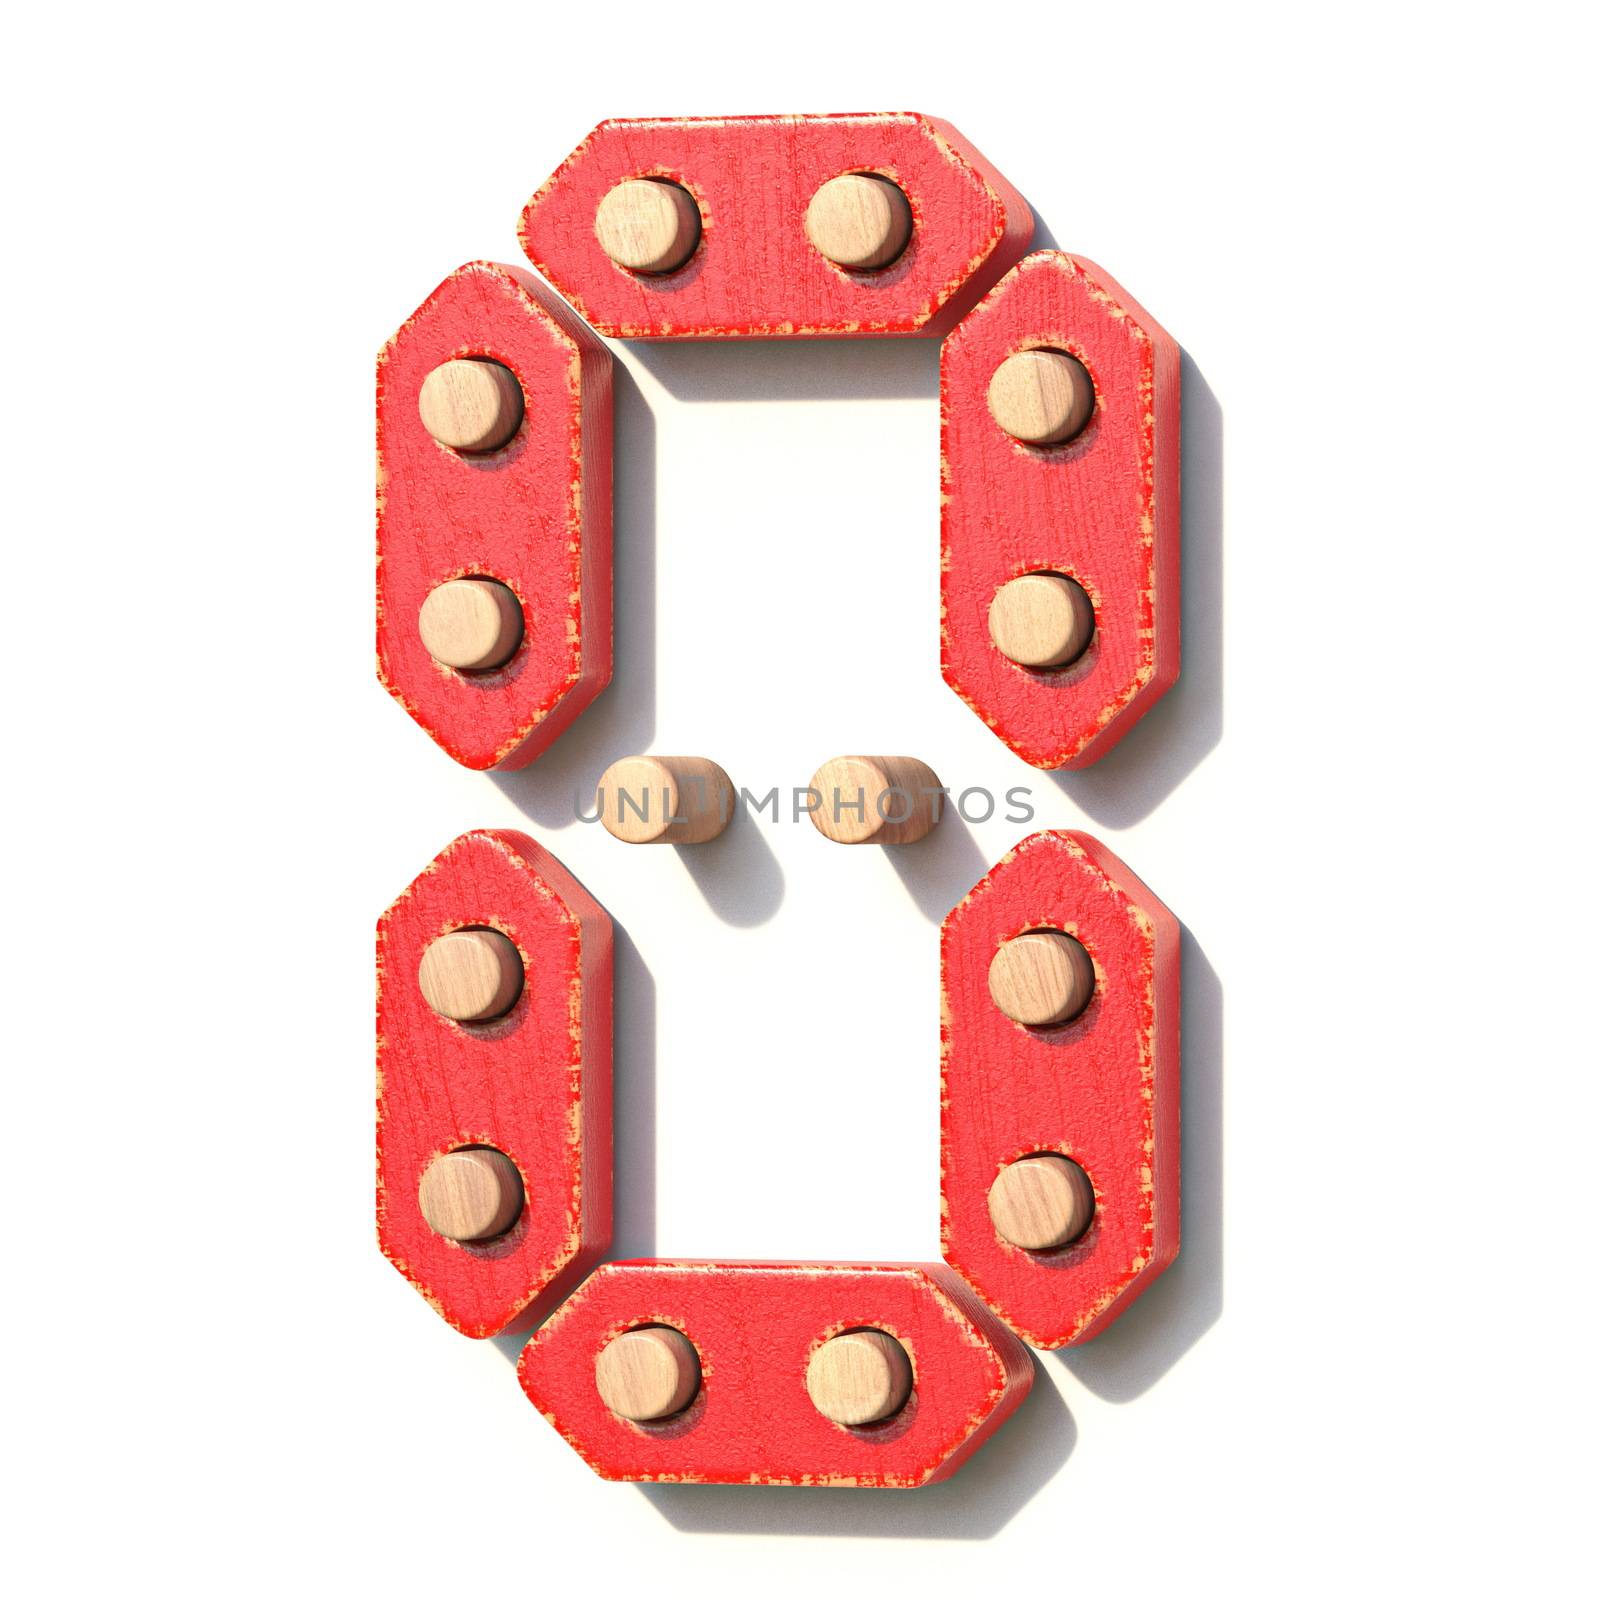 Wooden toy red digital number 0 ZERO 3D by djmilic